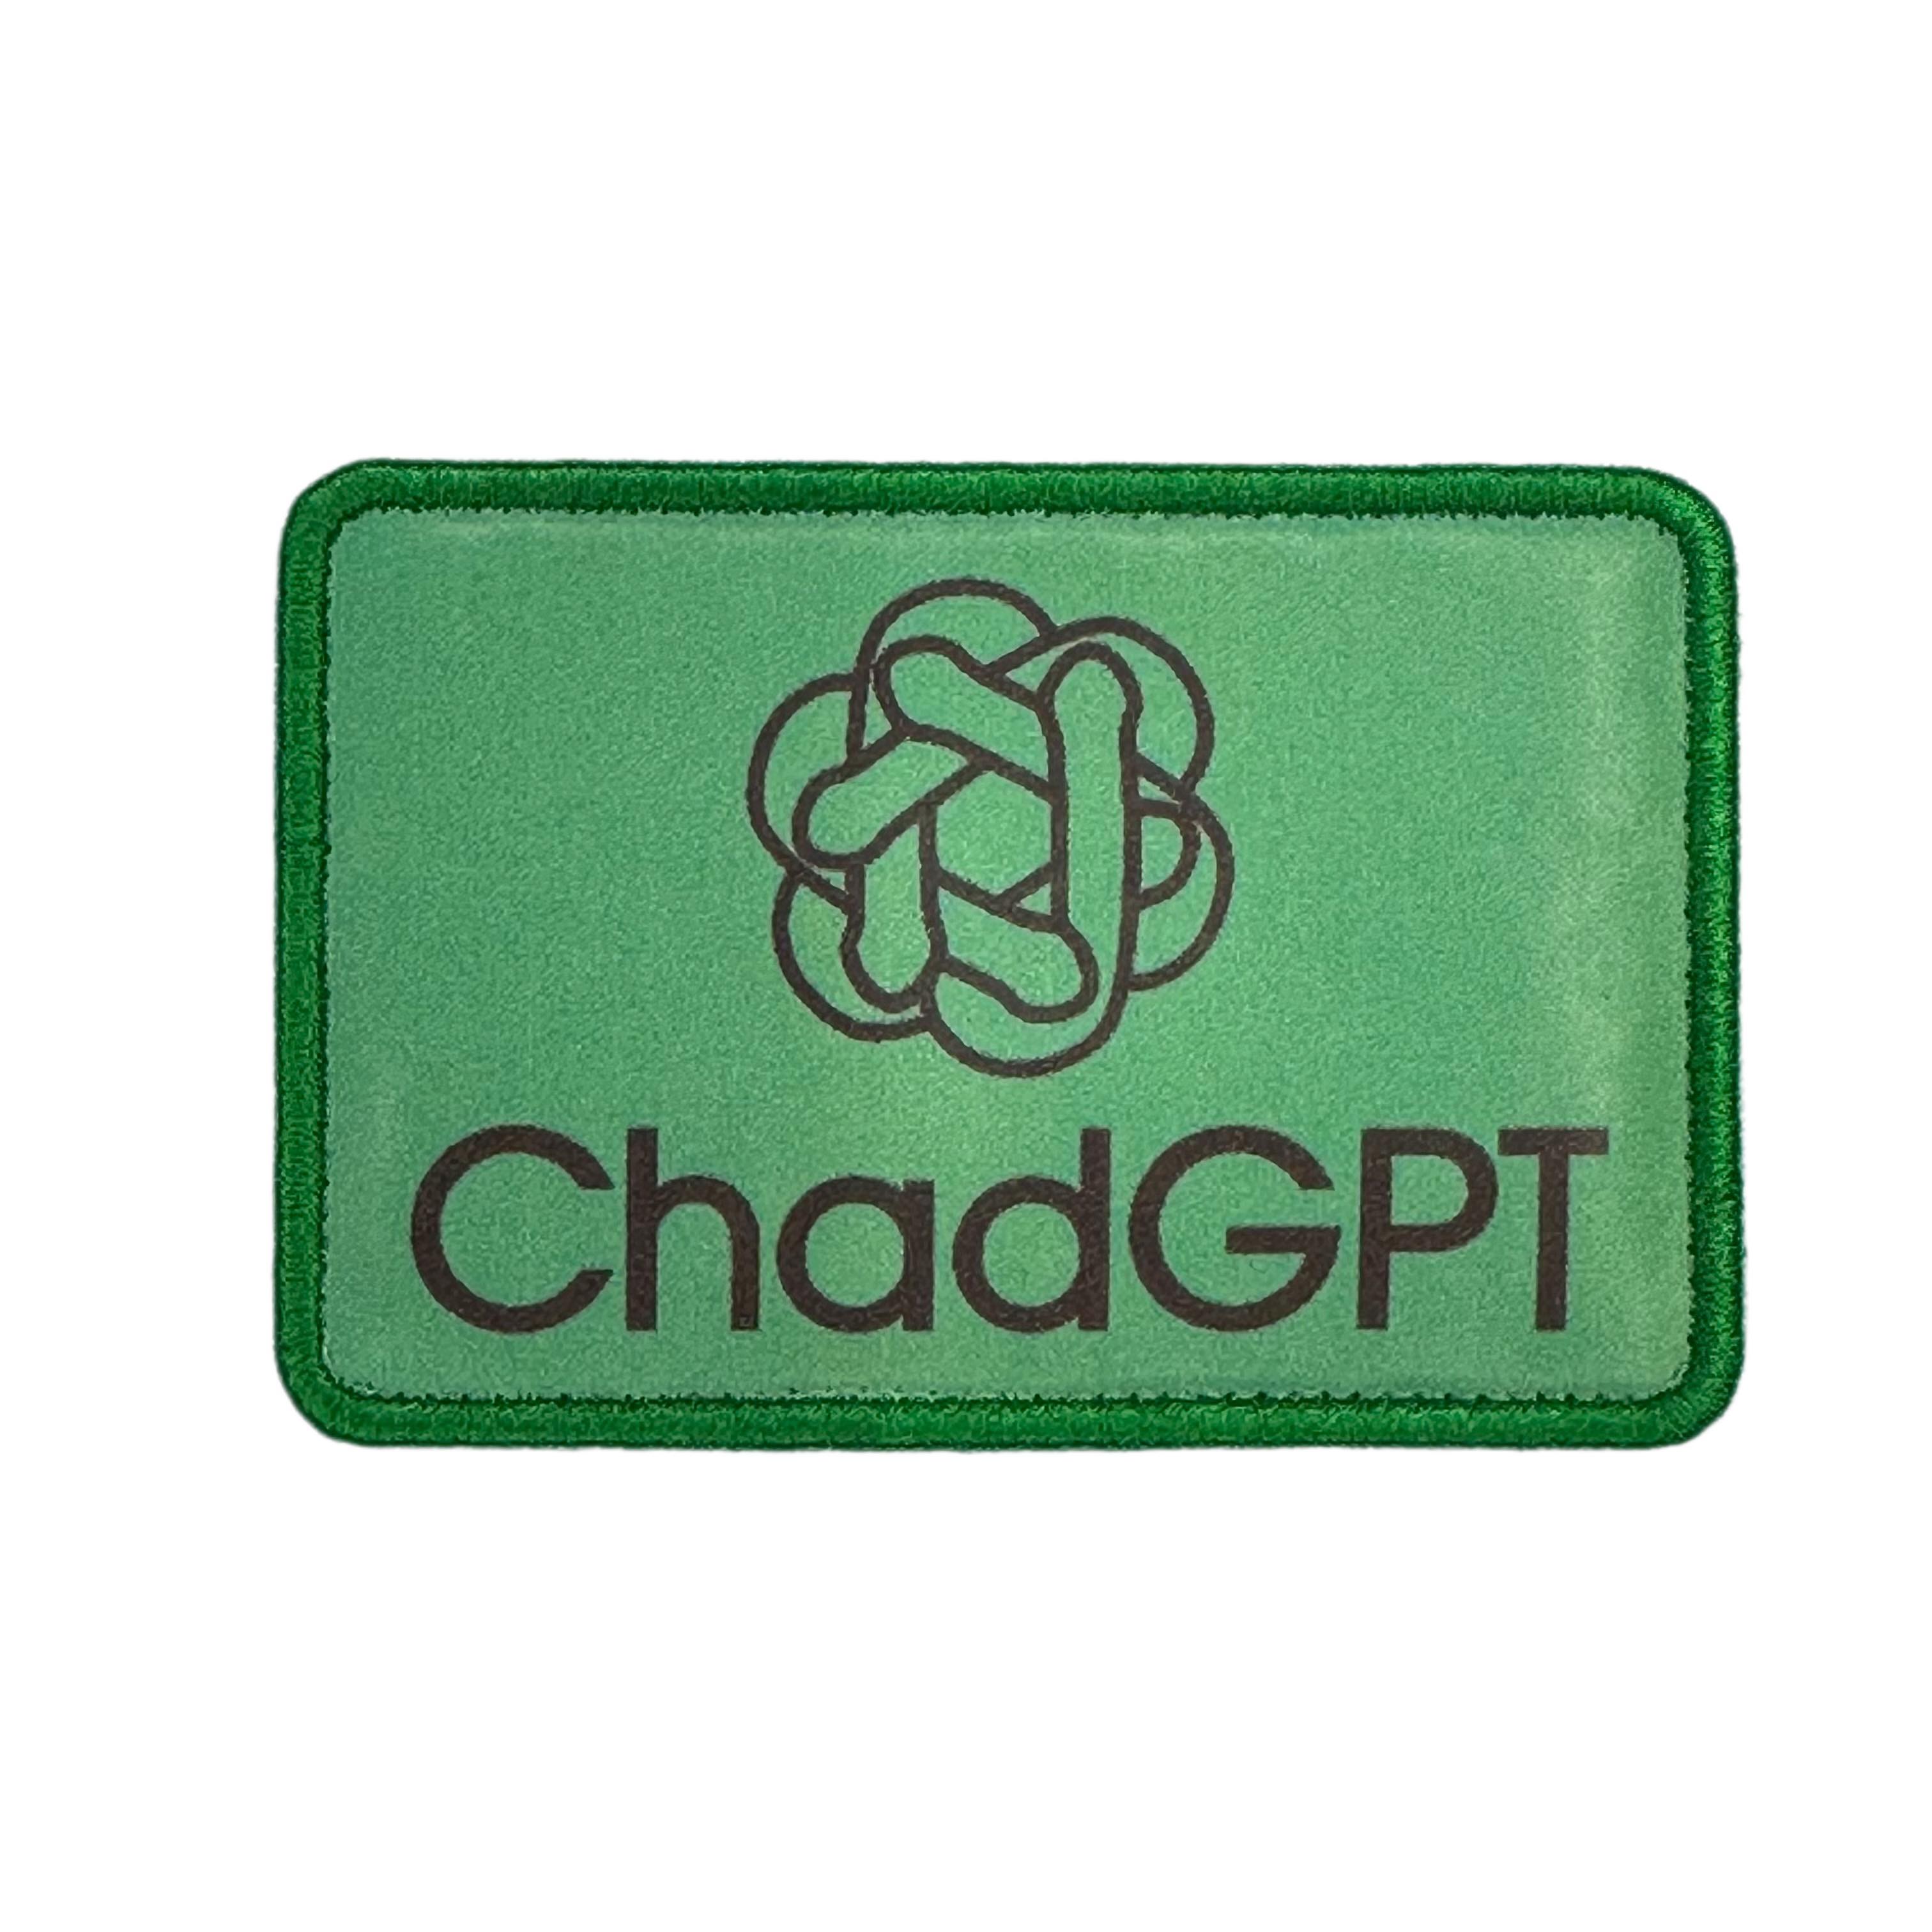 Printed Morale Patches - ChadGPT (ChatGPT) Velcro Morale Patch